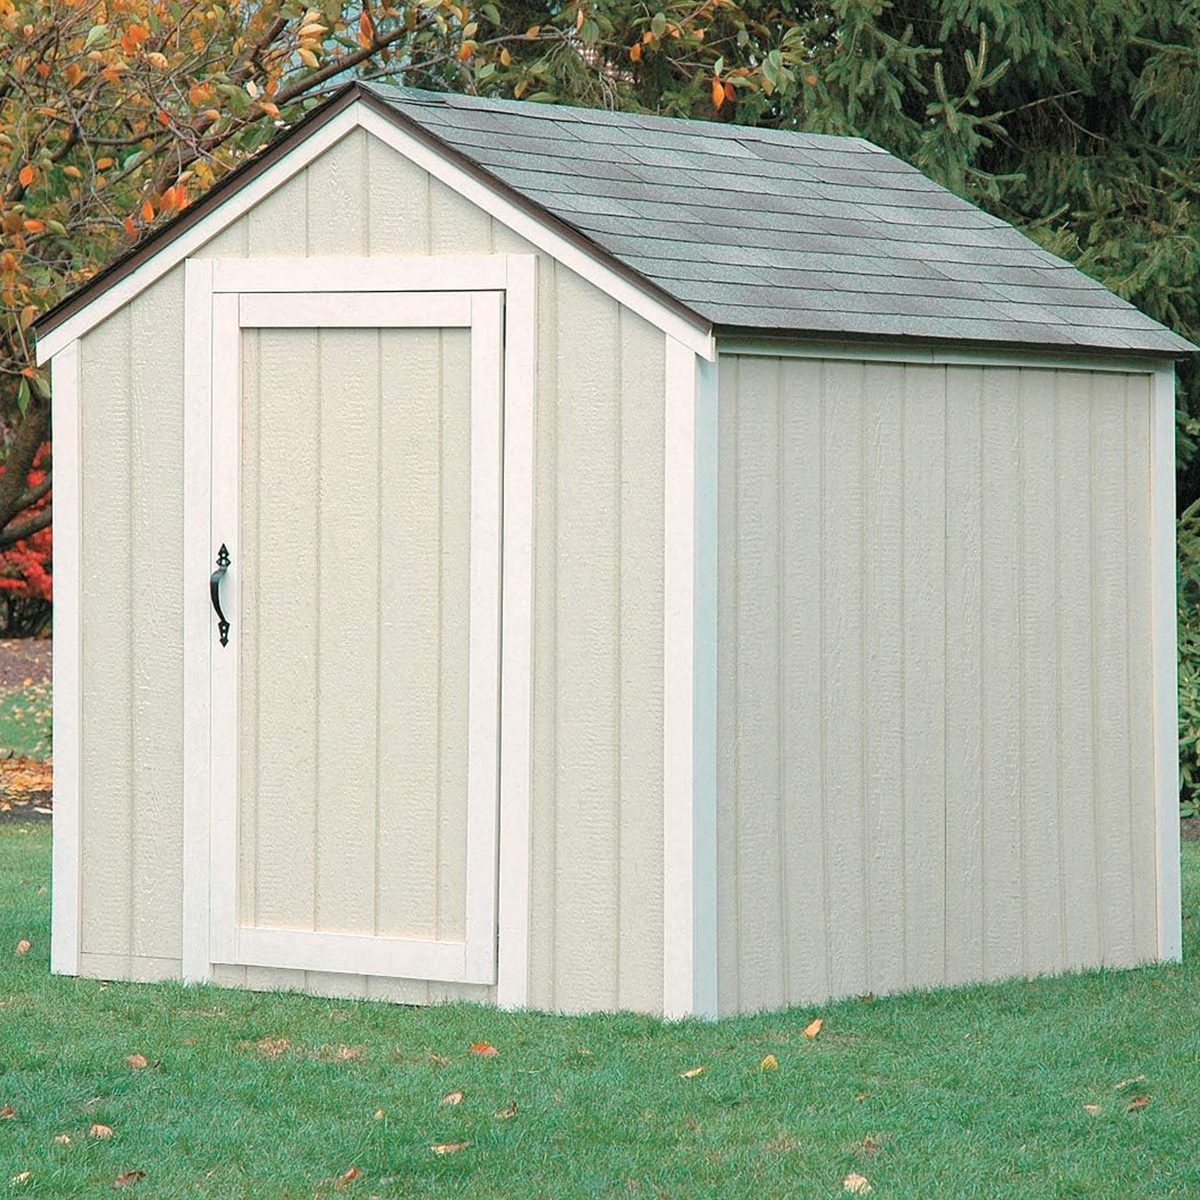 The 5 Best Easy-to-Build Shed Kits to Buy This Summer